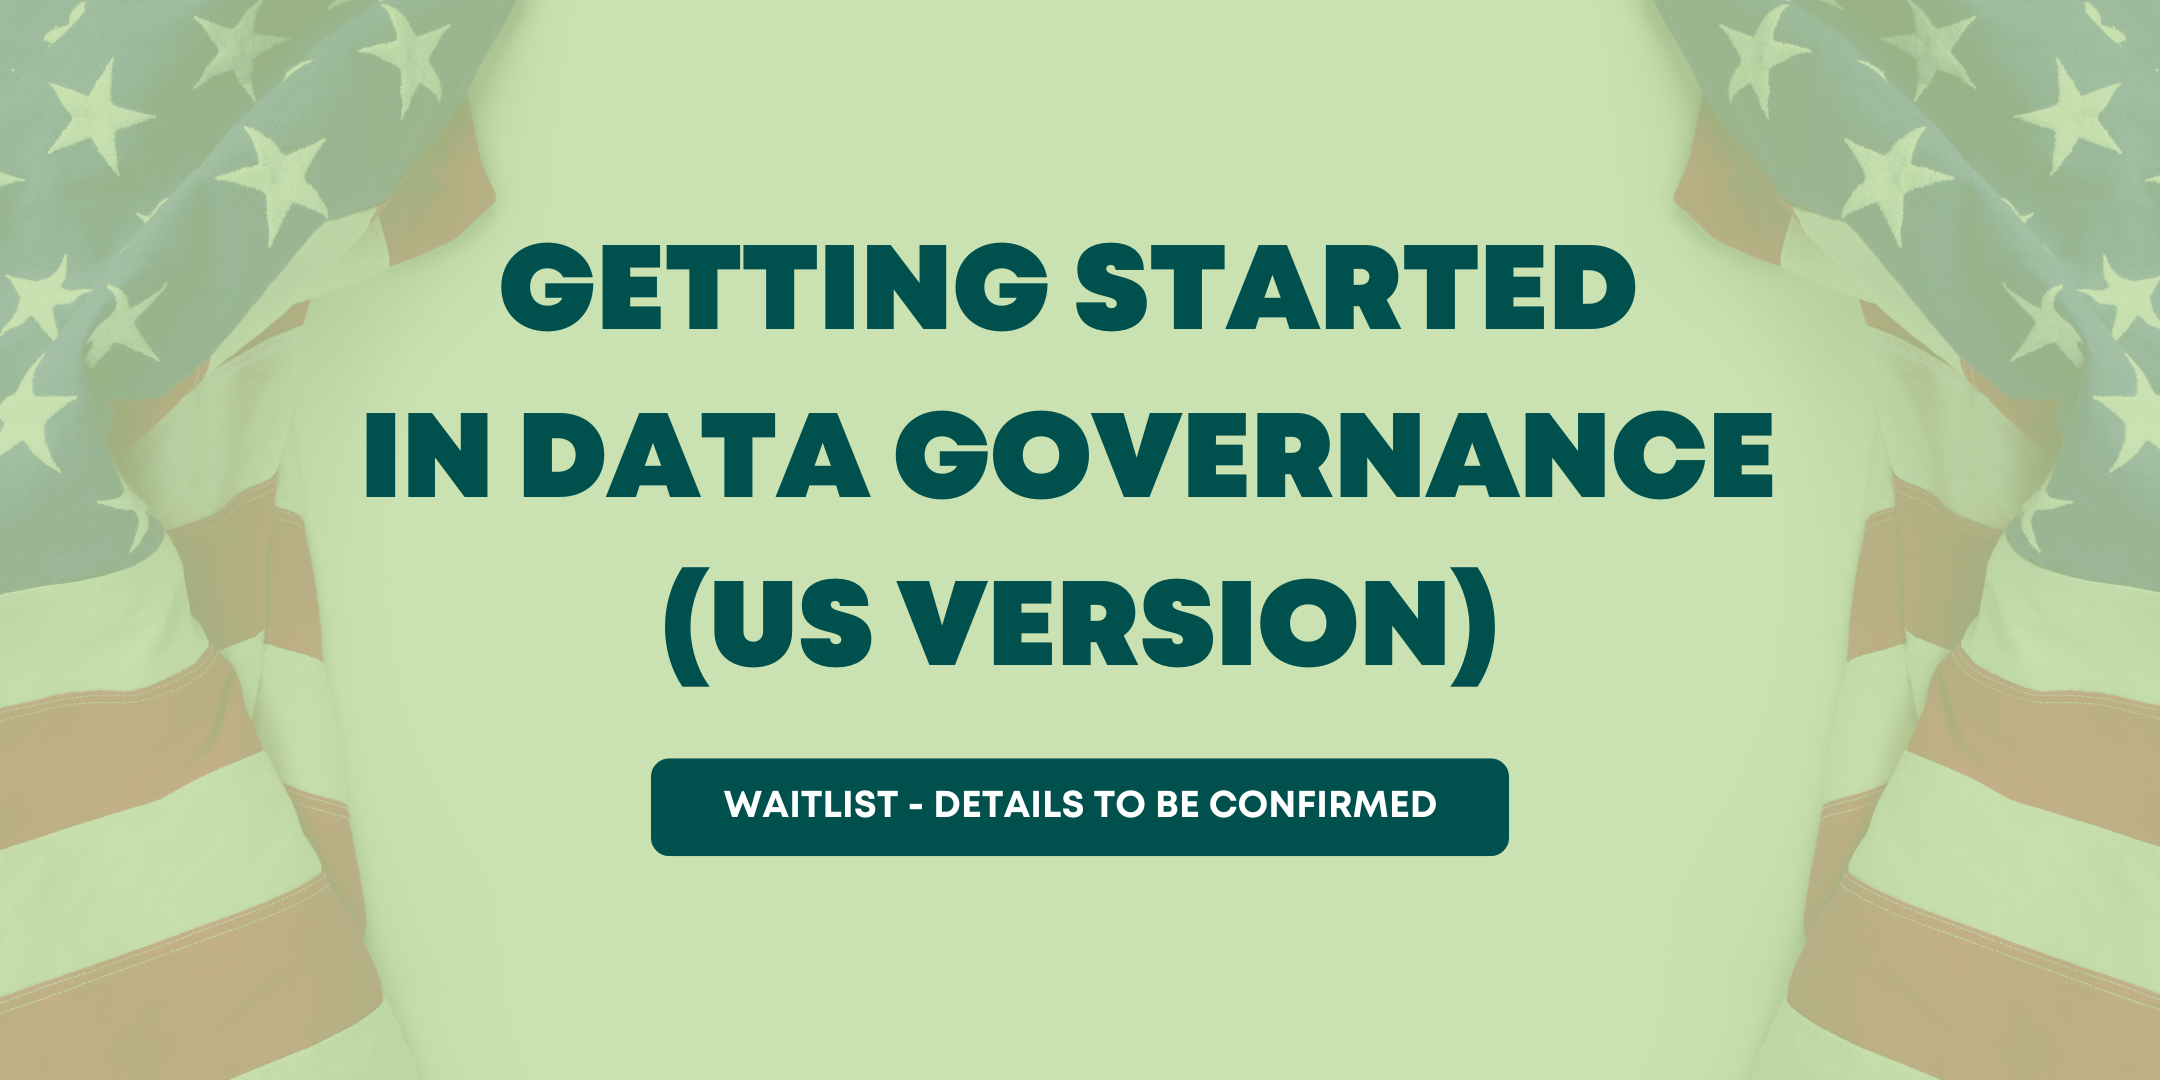 Getting Started in Data Governance (U.S Version) 